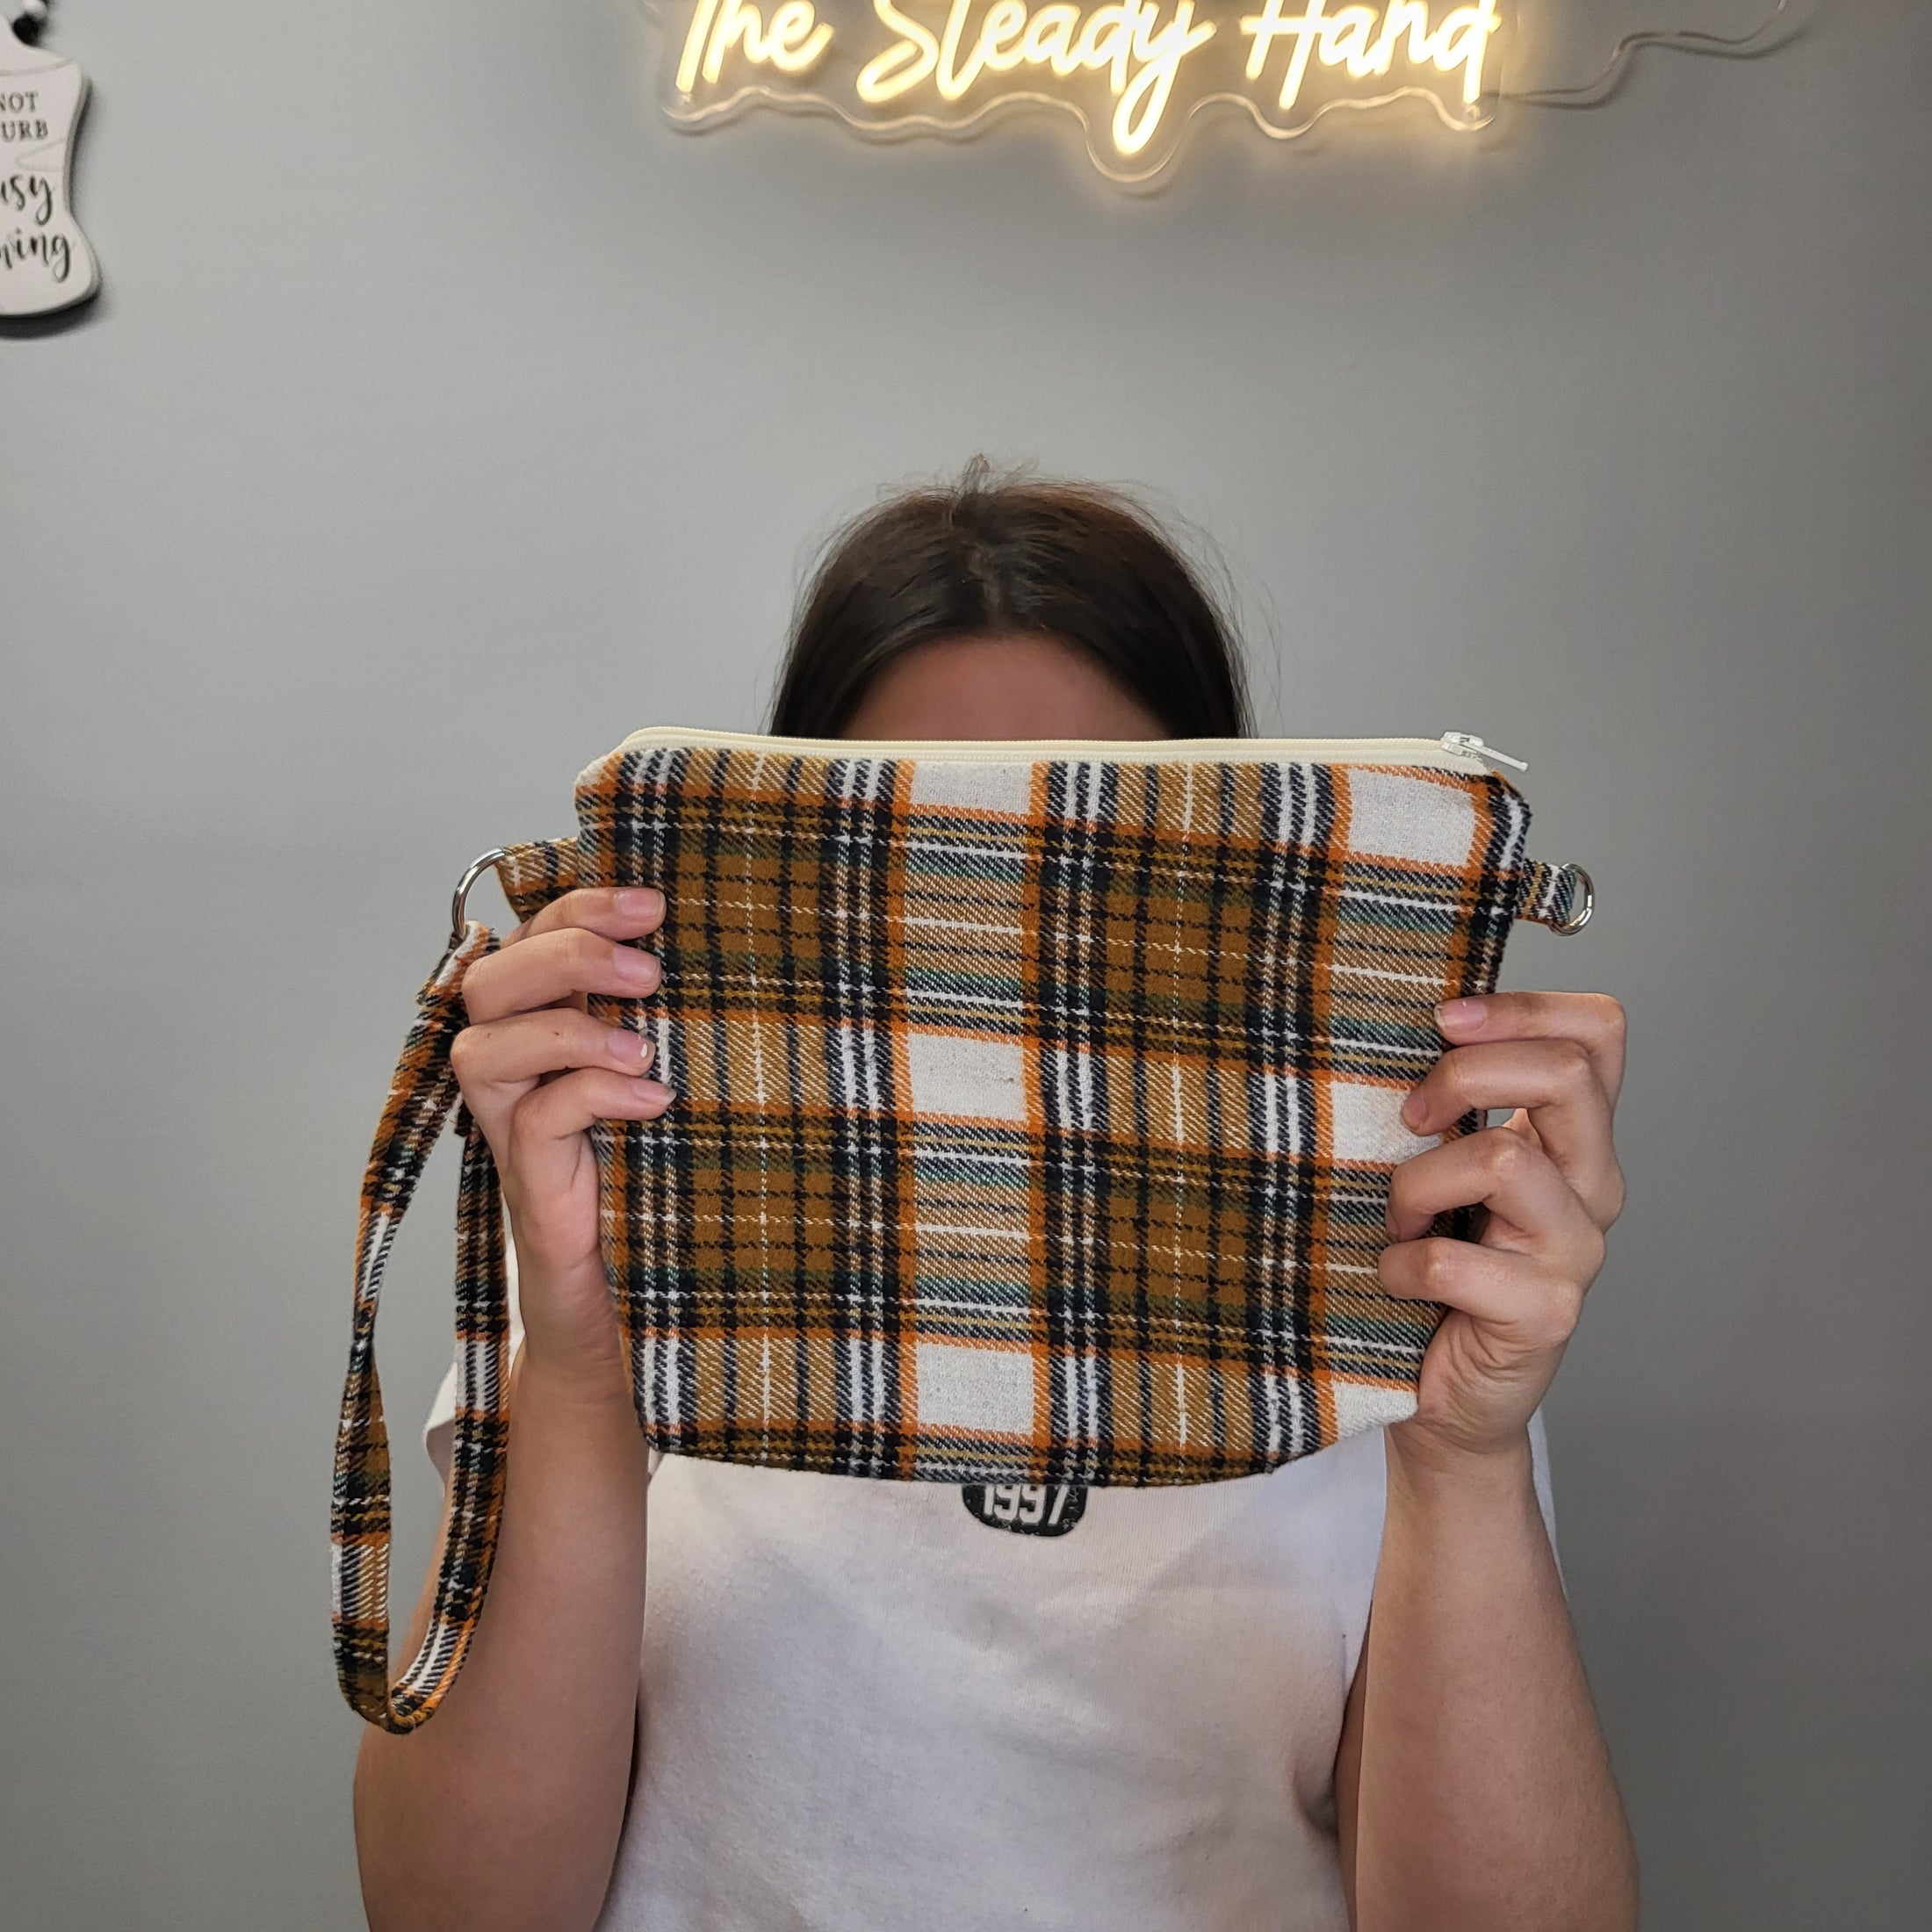 Orange and brown flannel clutch.